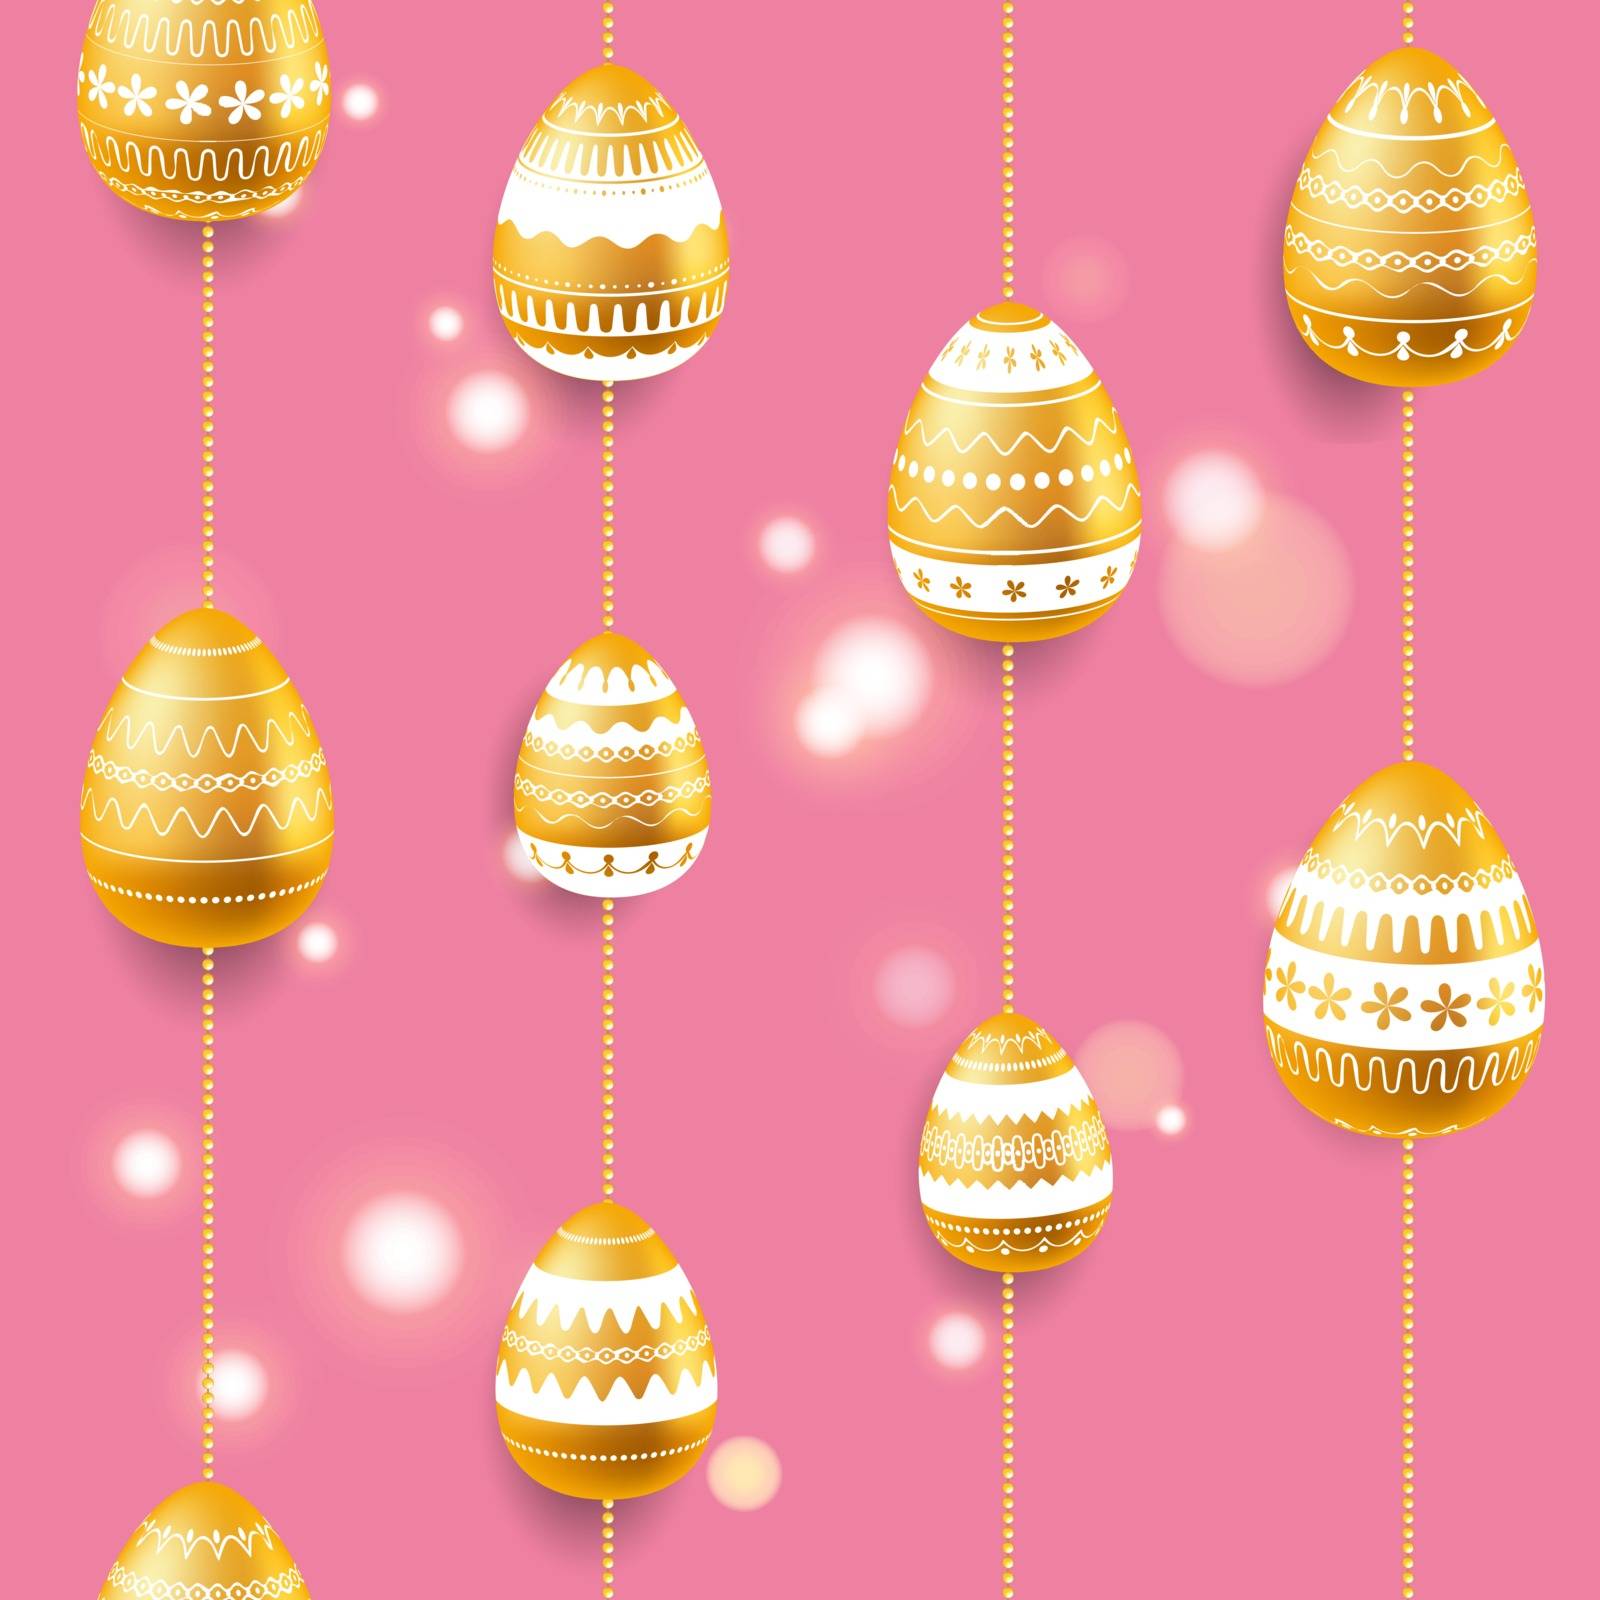 Easter egg. Pattern with realistic Easter eggs. Seamless texture vector illustration with glow effect. Religious holiday background decoration. Golden eggs with white ornaments on pink background. Happy Easter